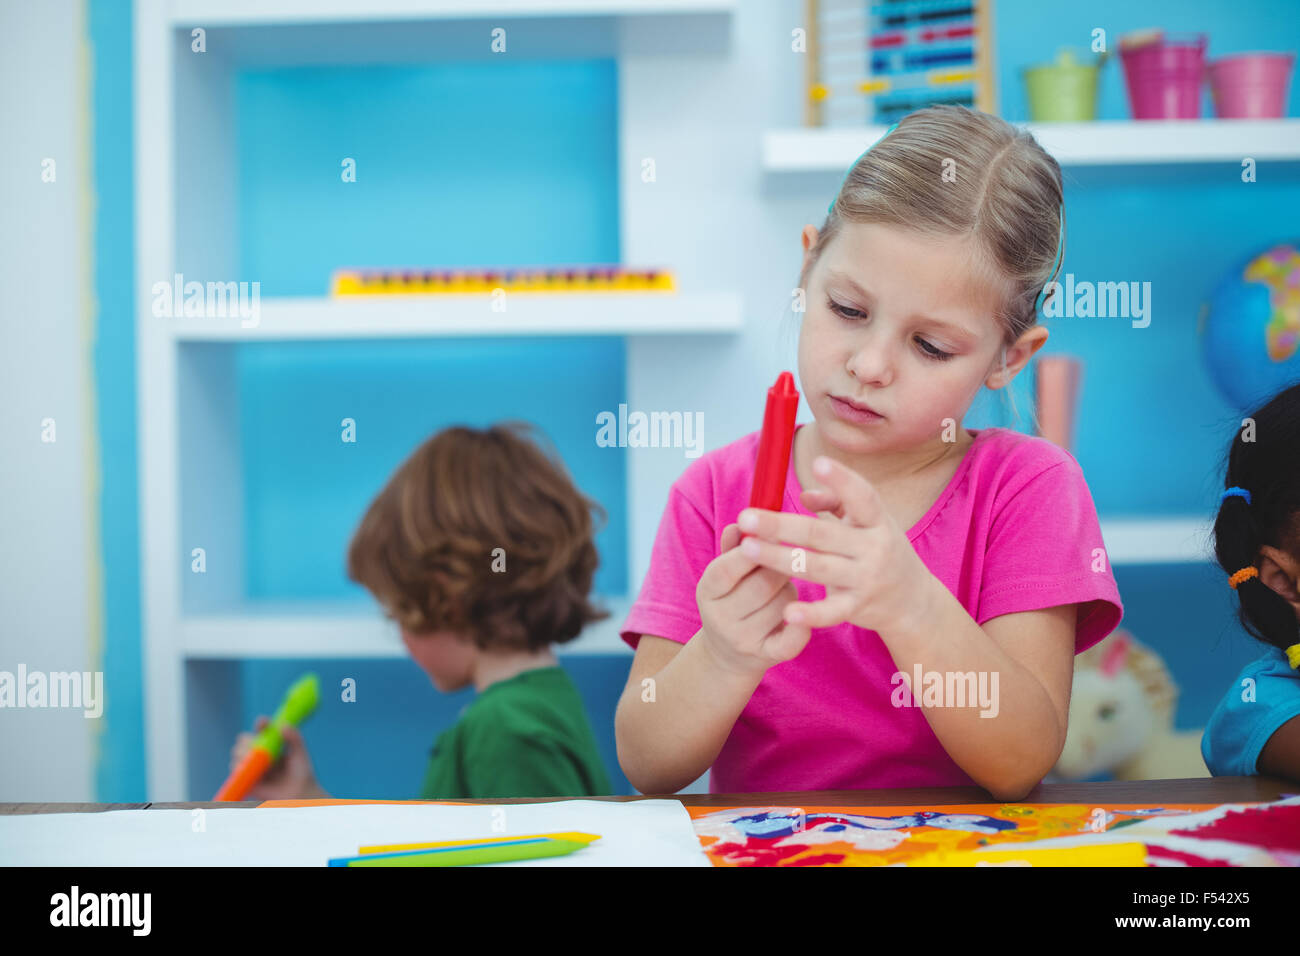 Small girl holding a red crayon Stock Photo